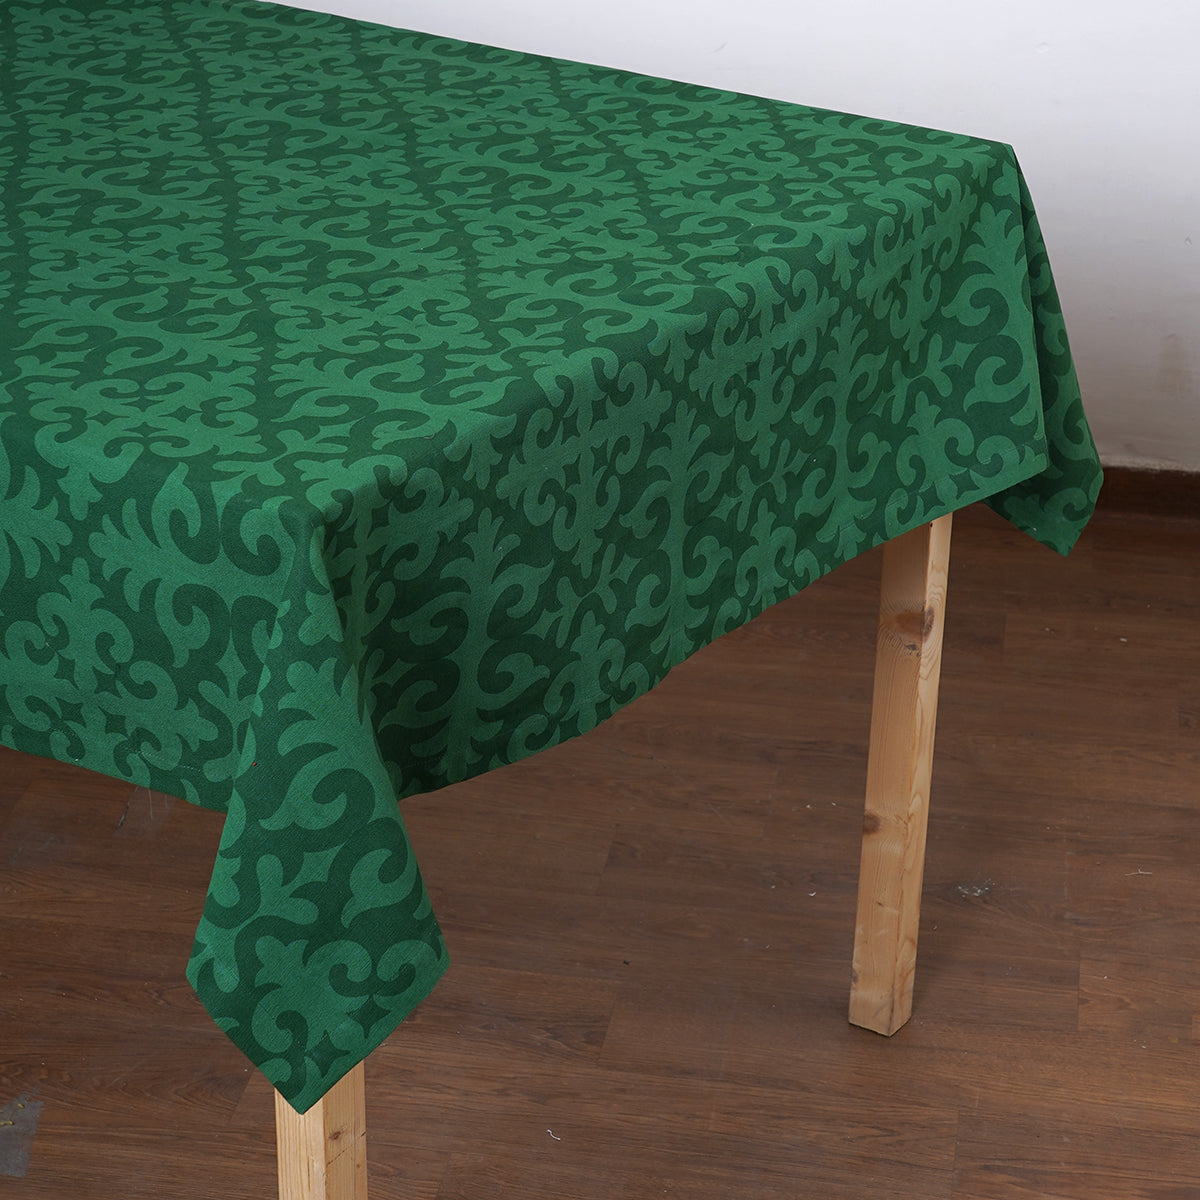 Tropical Green table cloth, moroccan print on 100% cotton, sizes available